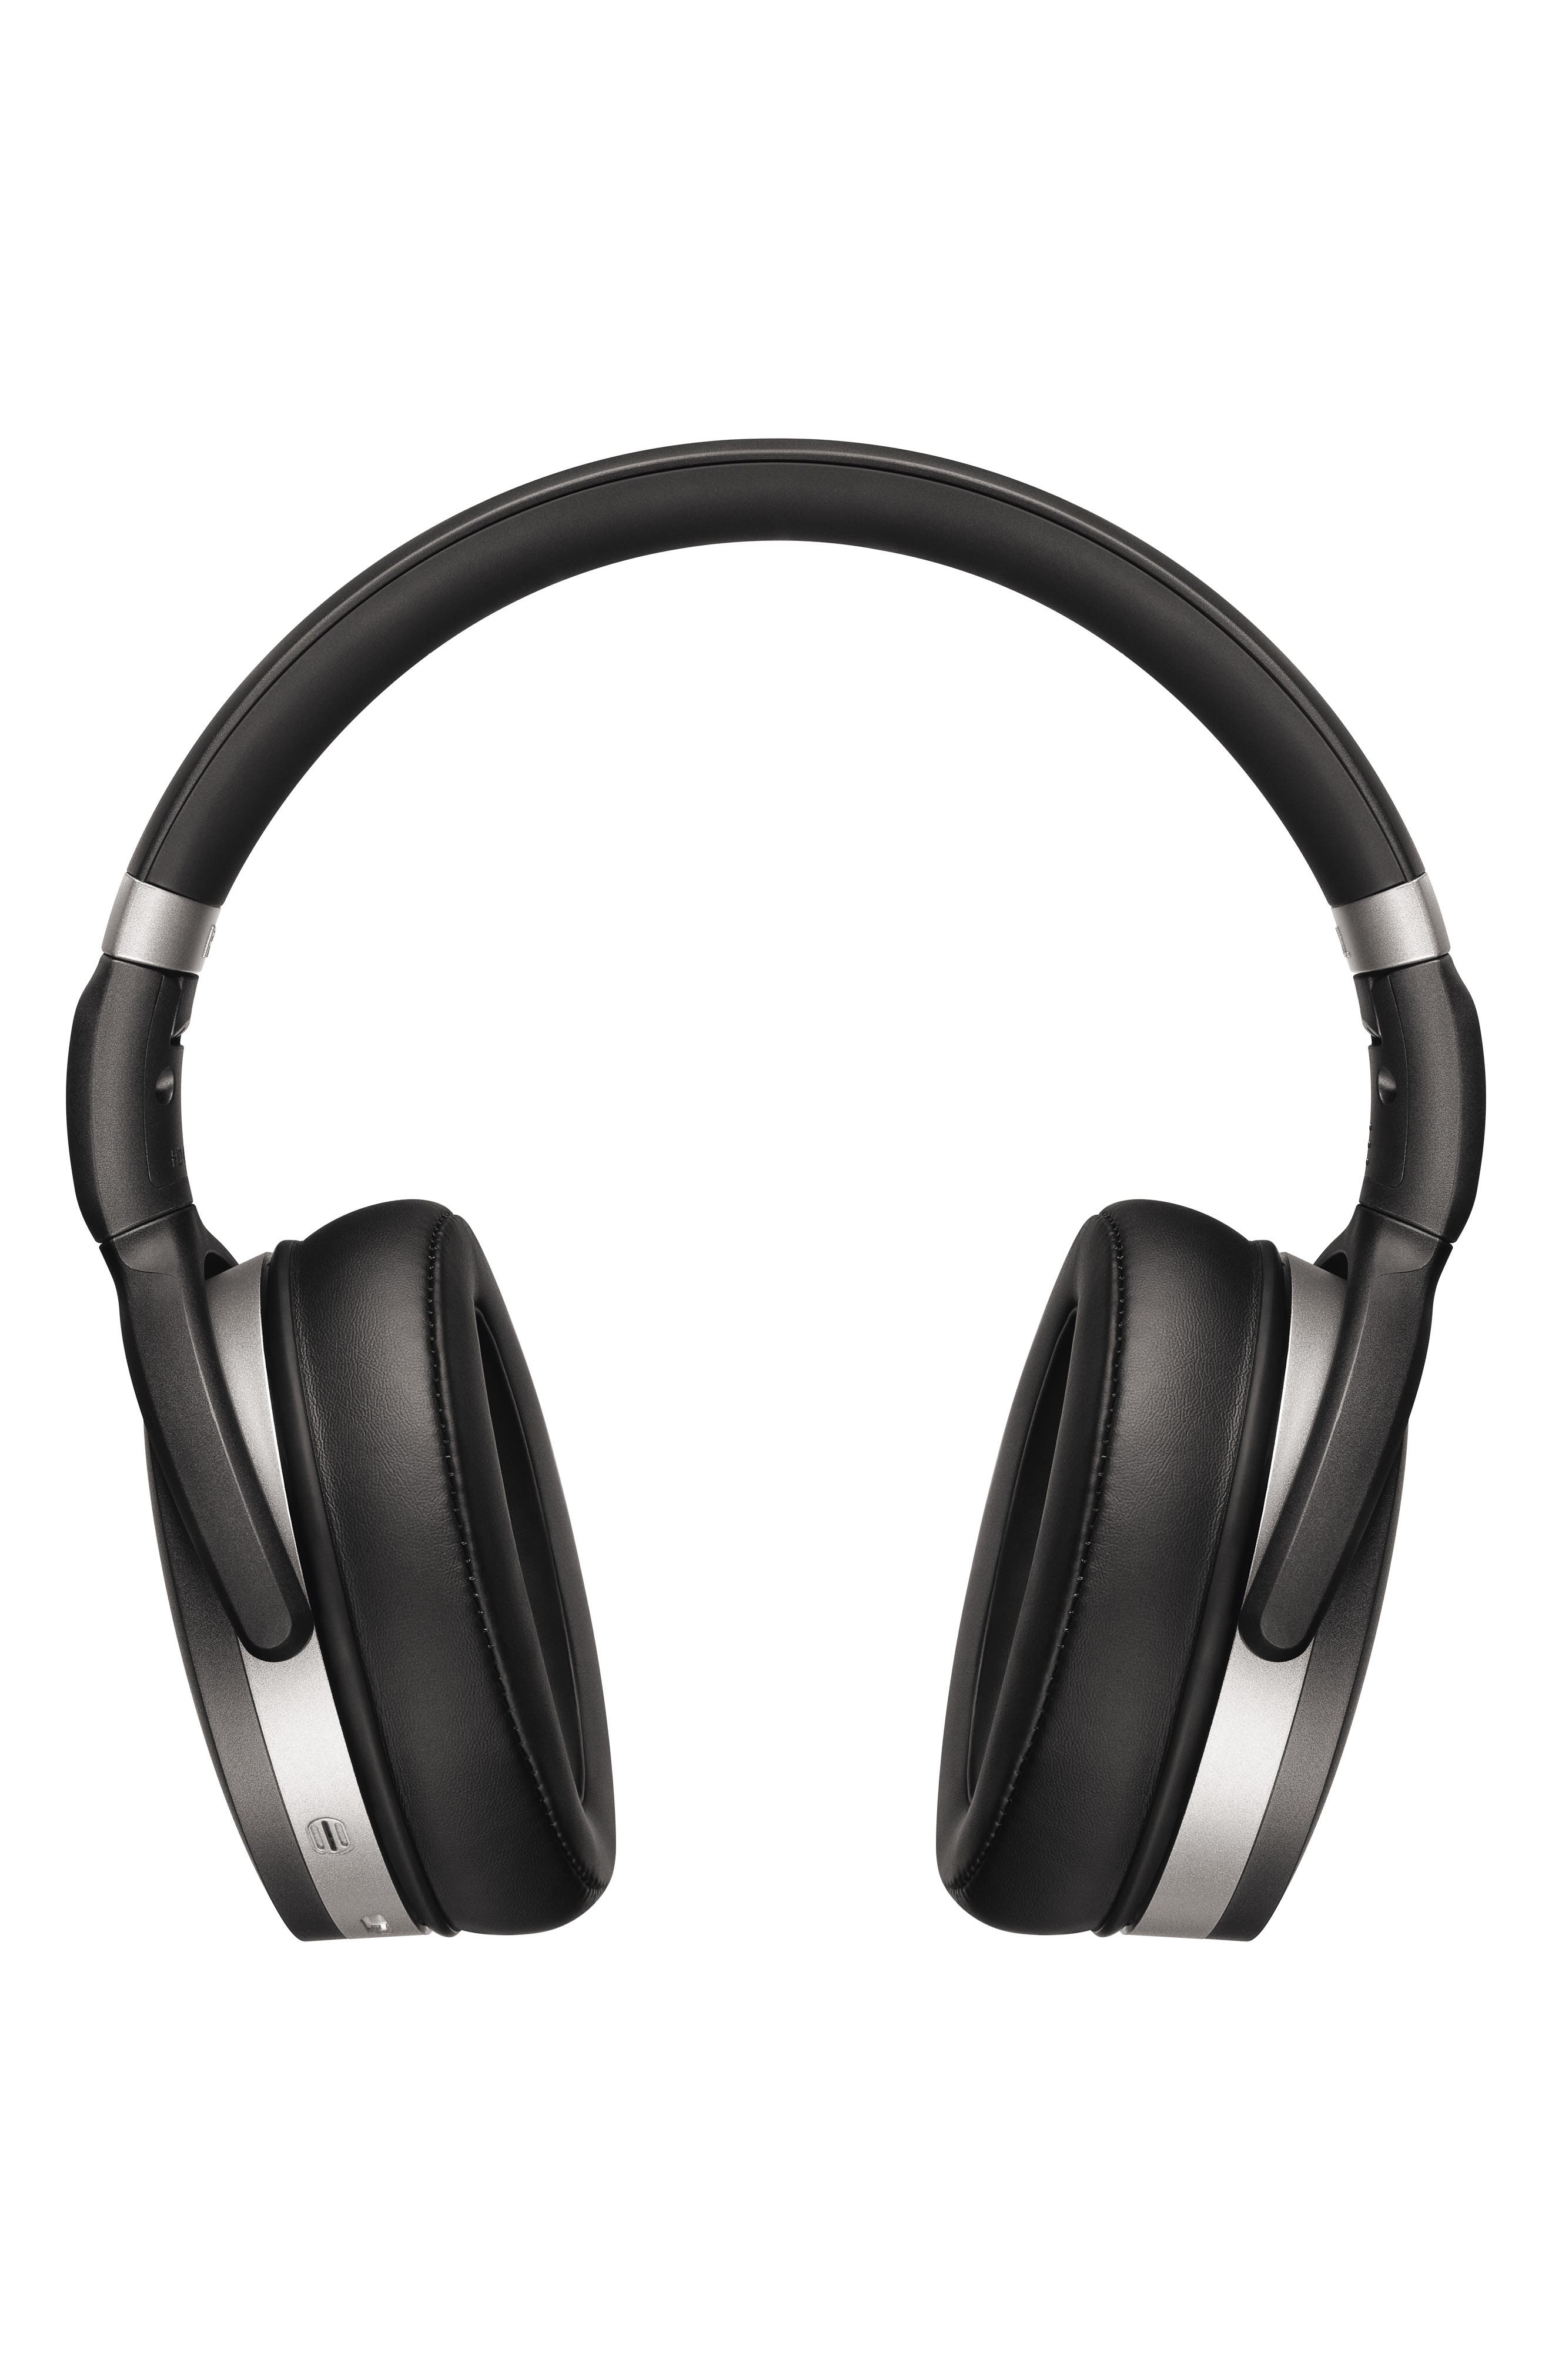 UPC 615104266964 product image for Sennheiser Hd 4.50 Bluetooth Noise Cancelling Over-Ear Headphones, Size One Size | upcitemdb.com